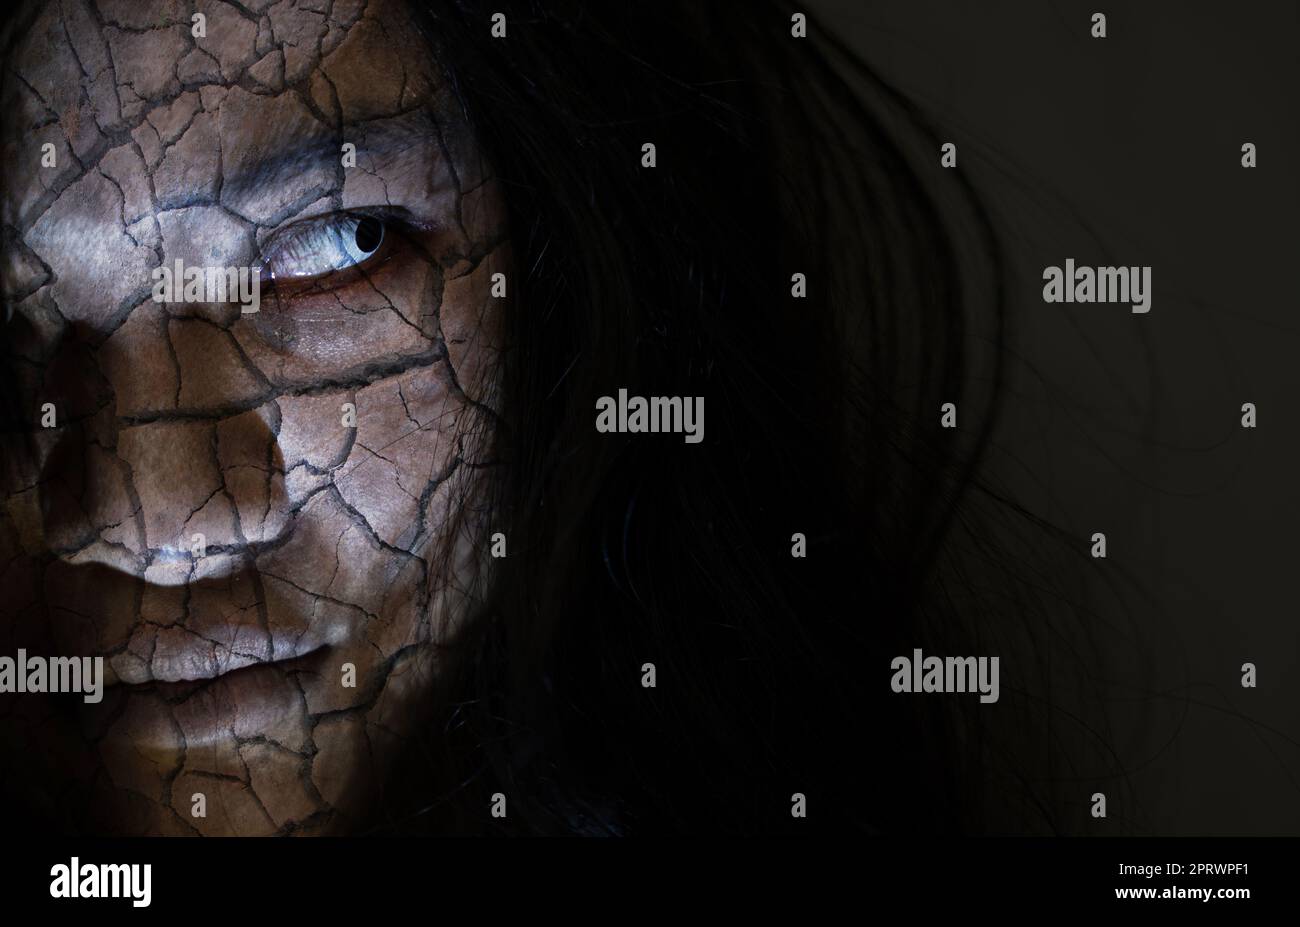 Close up face of Asian woman ghost or zombie horror creepy scary Stock Photo